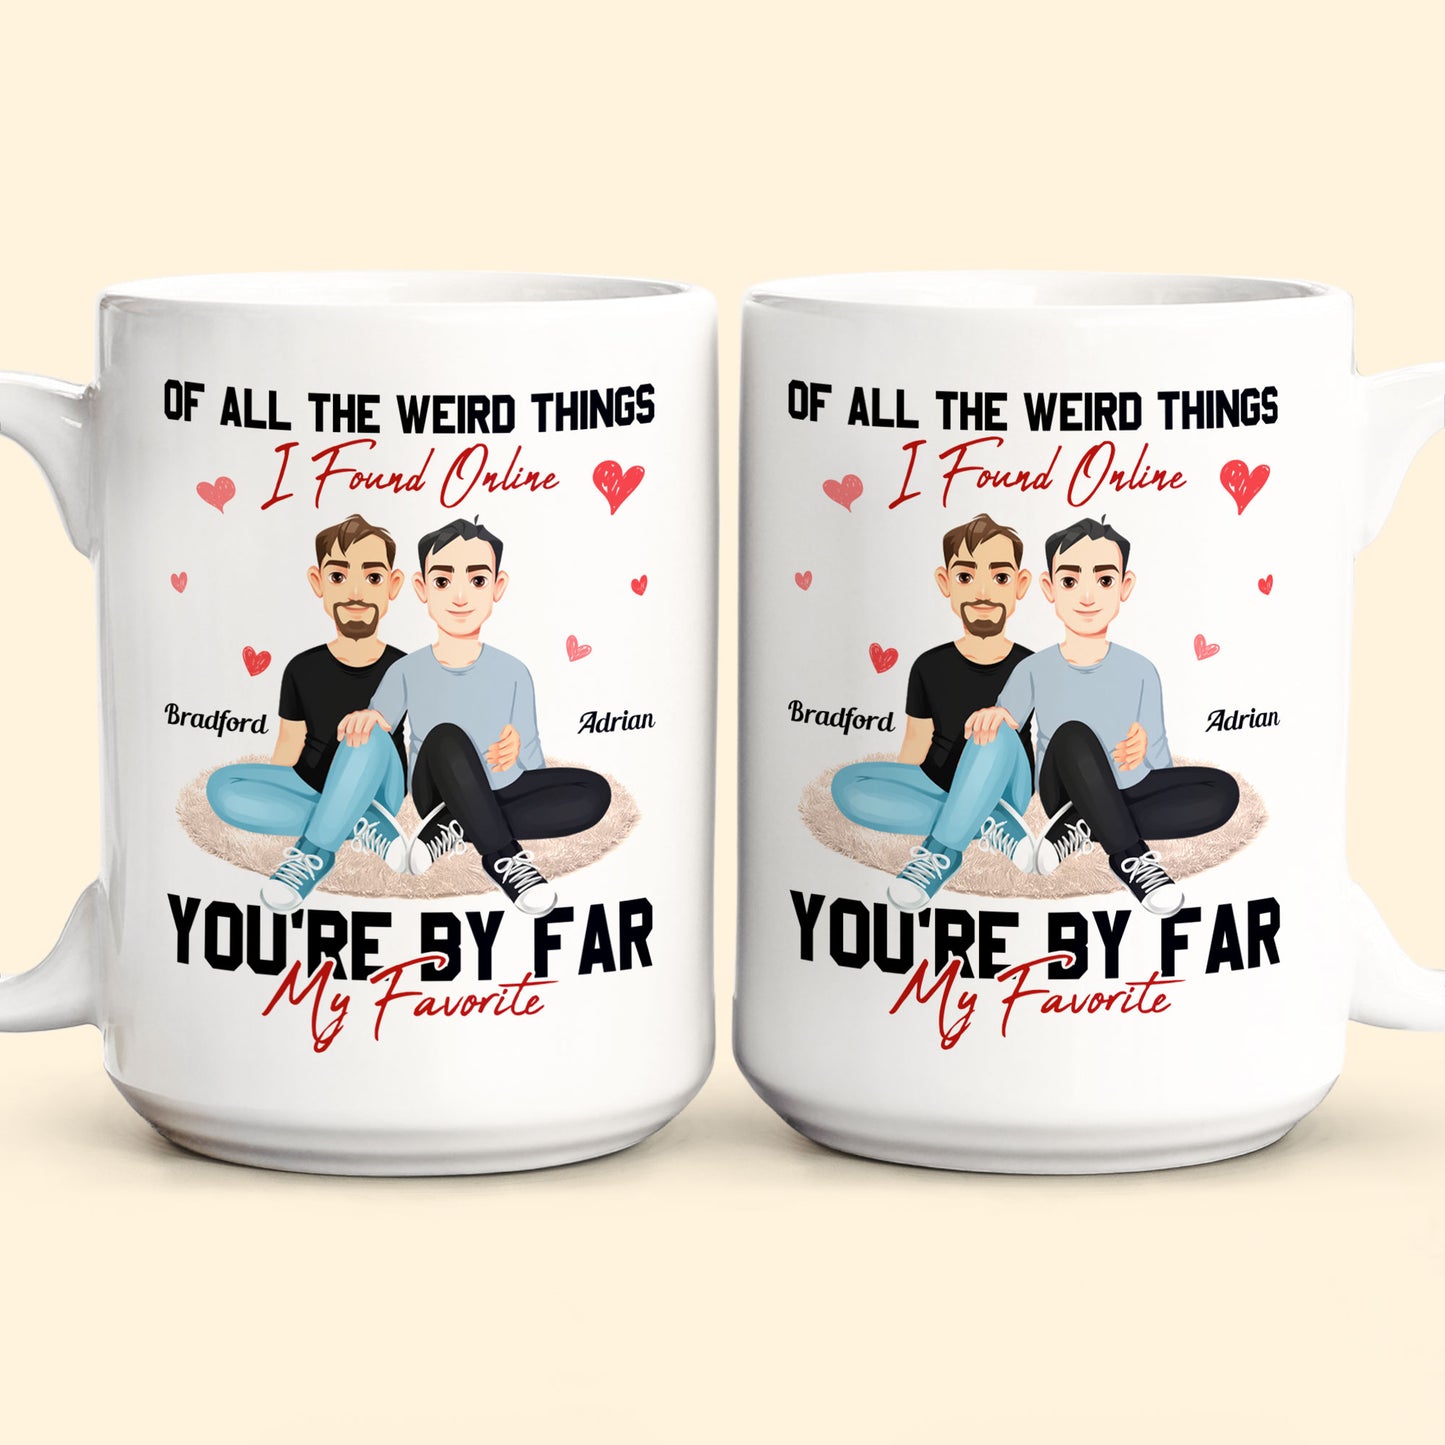 You Are The Best Thing I Ever Found On The Internet - Personalized Mug